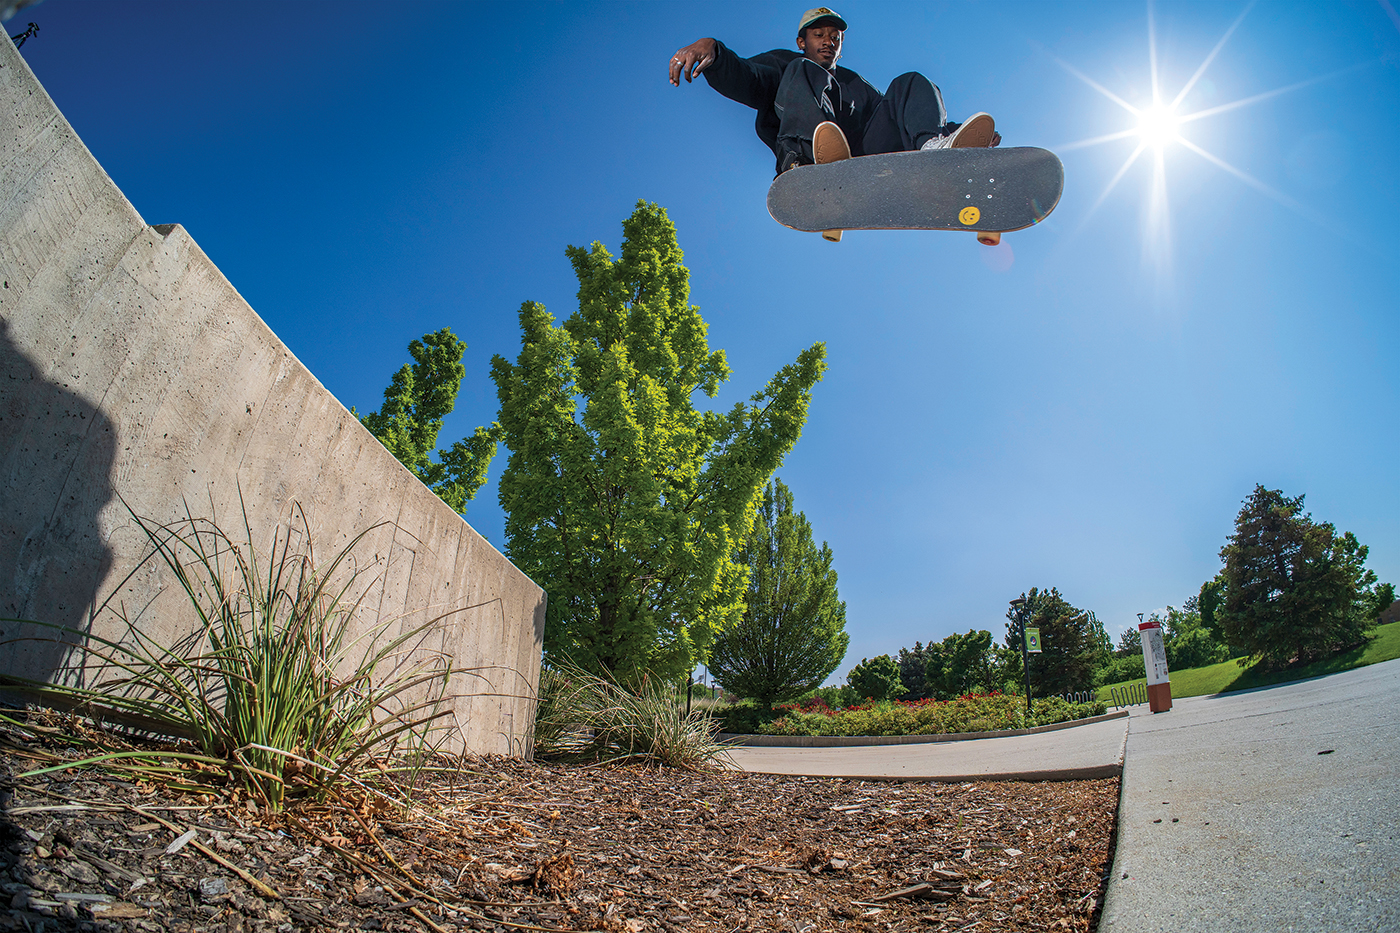 Jerred Bradley's finally getting the recognition he deserves after being asked to ride for Gallery Skateboards, a Utah-based board brand. If you see him in the wild give him a high five and get ready for a spot demo—he’ll surely get multiple tricks at any spot he skates.